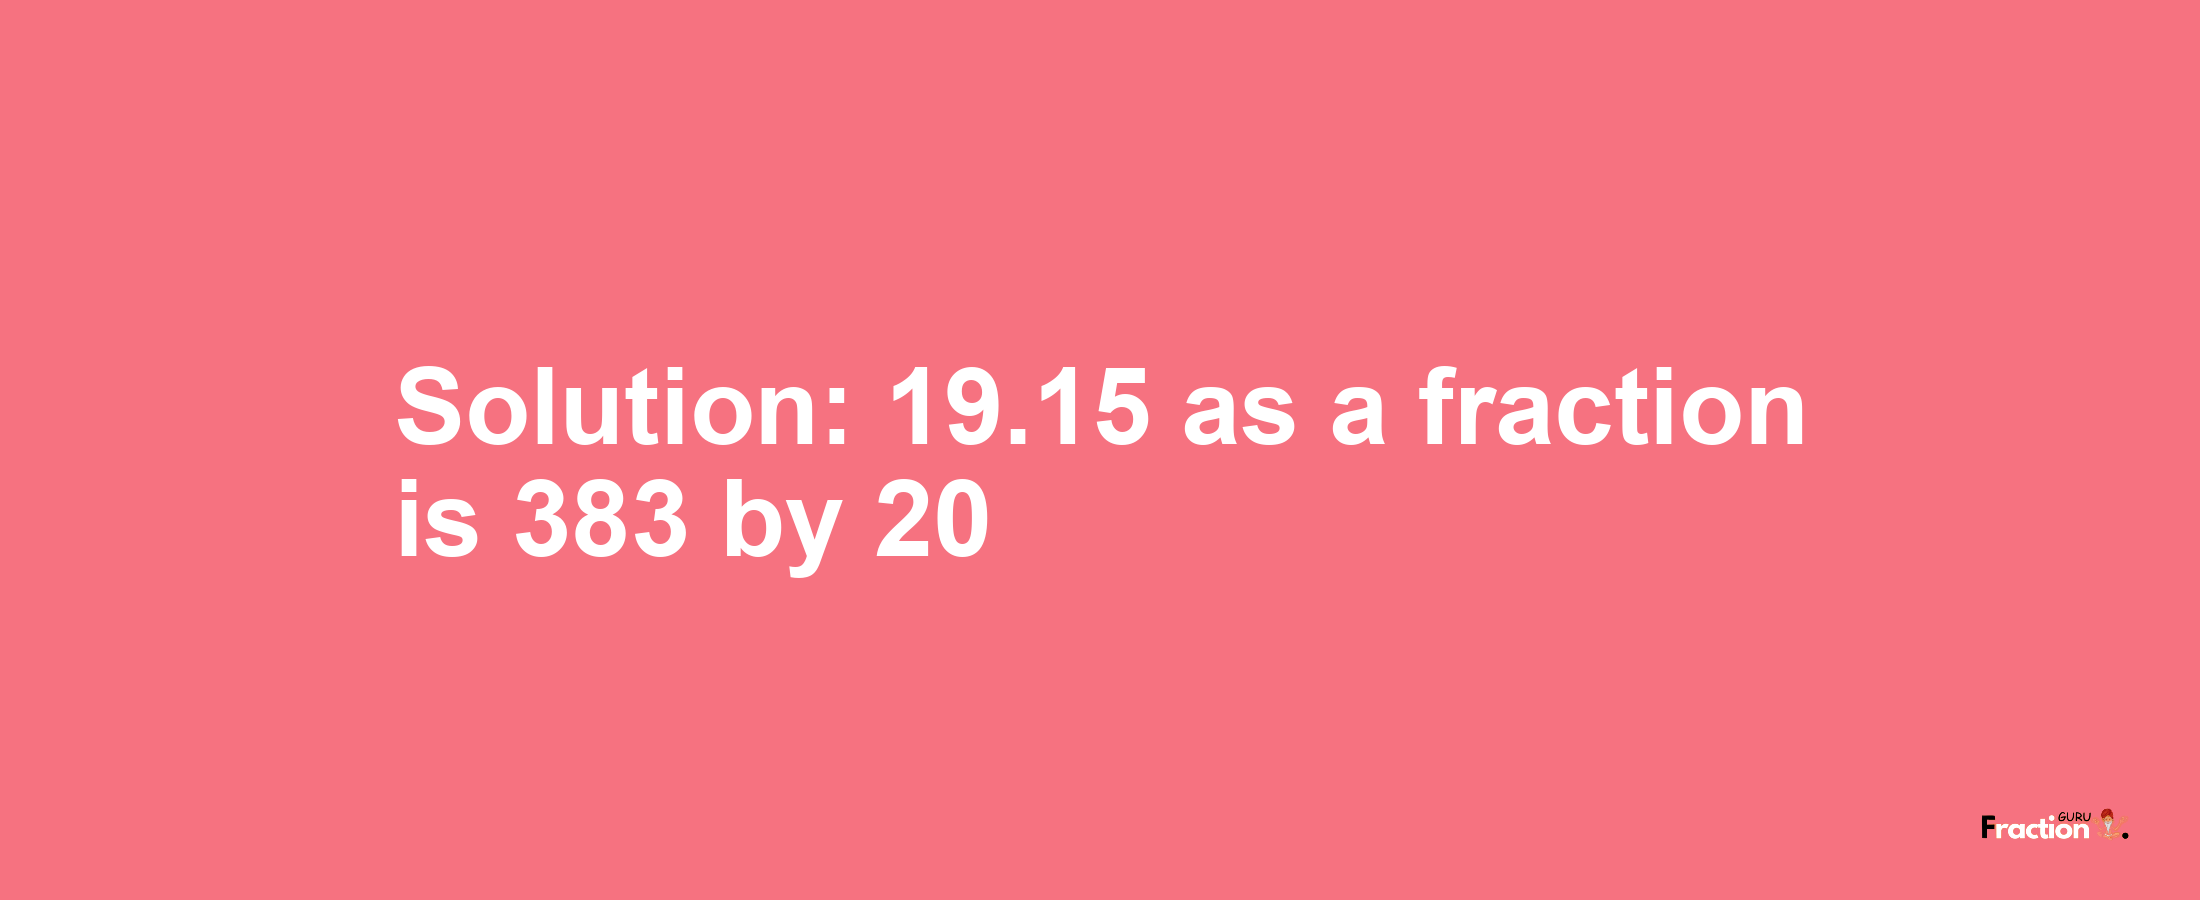 Solution:19.15 as a fraction is 383/20